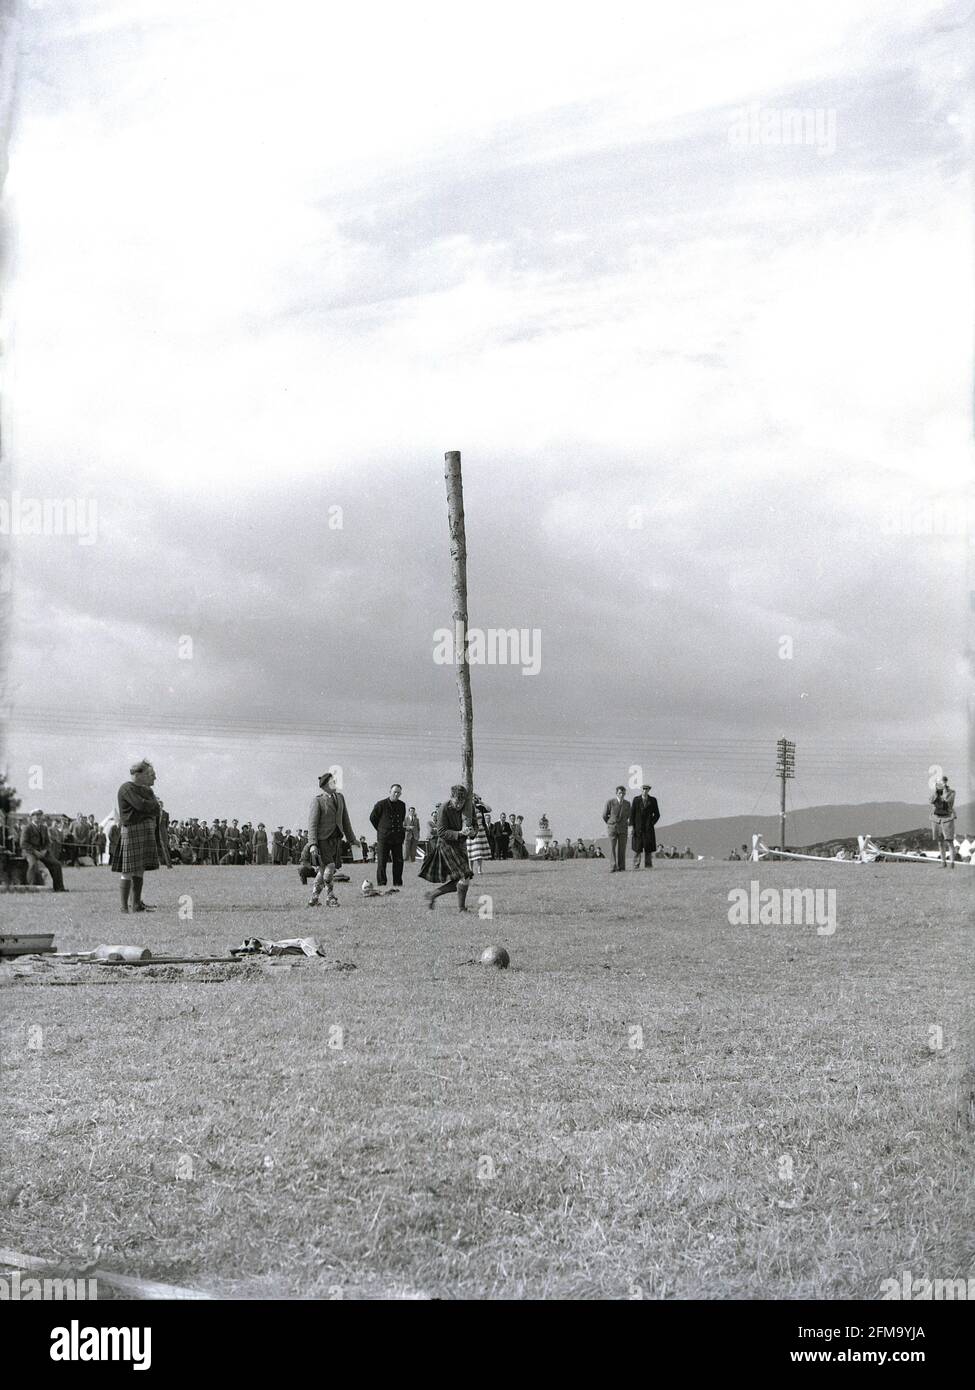 1956, a competitor at a highland games about to toss the caber, Scotland, UK. A traditional and well-loved athletic event at a Scottish highland games, the 'caber toss' involves a competitor tossing  long, heavy pole so that it turns end over end. Usually made from a Larch tree, and up to 20 feet in length, the caber is stood upright and then lifted up and tossed, not thrown. Caber is the Gaelic word for pole. Devised by Scottish woodsmen, the caber toss was first recorded in 1574, at a military meet  as toss 'ye barr', when clan warriors tested their physical strength in sporting contests. Stock Photo